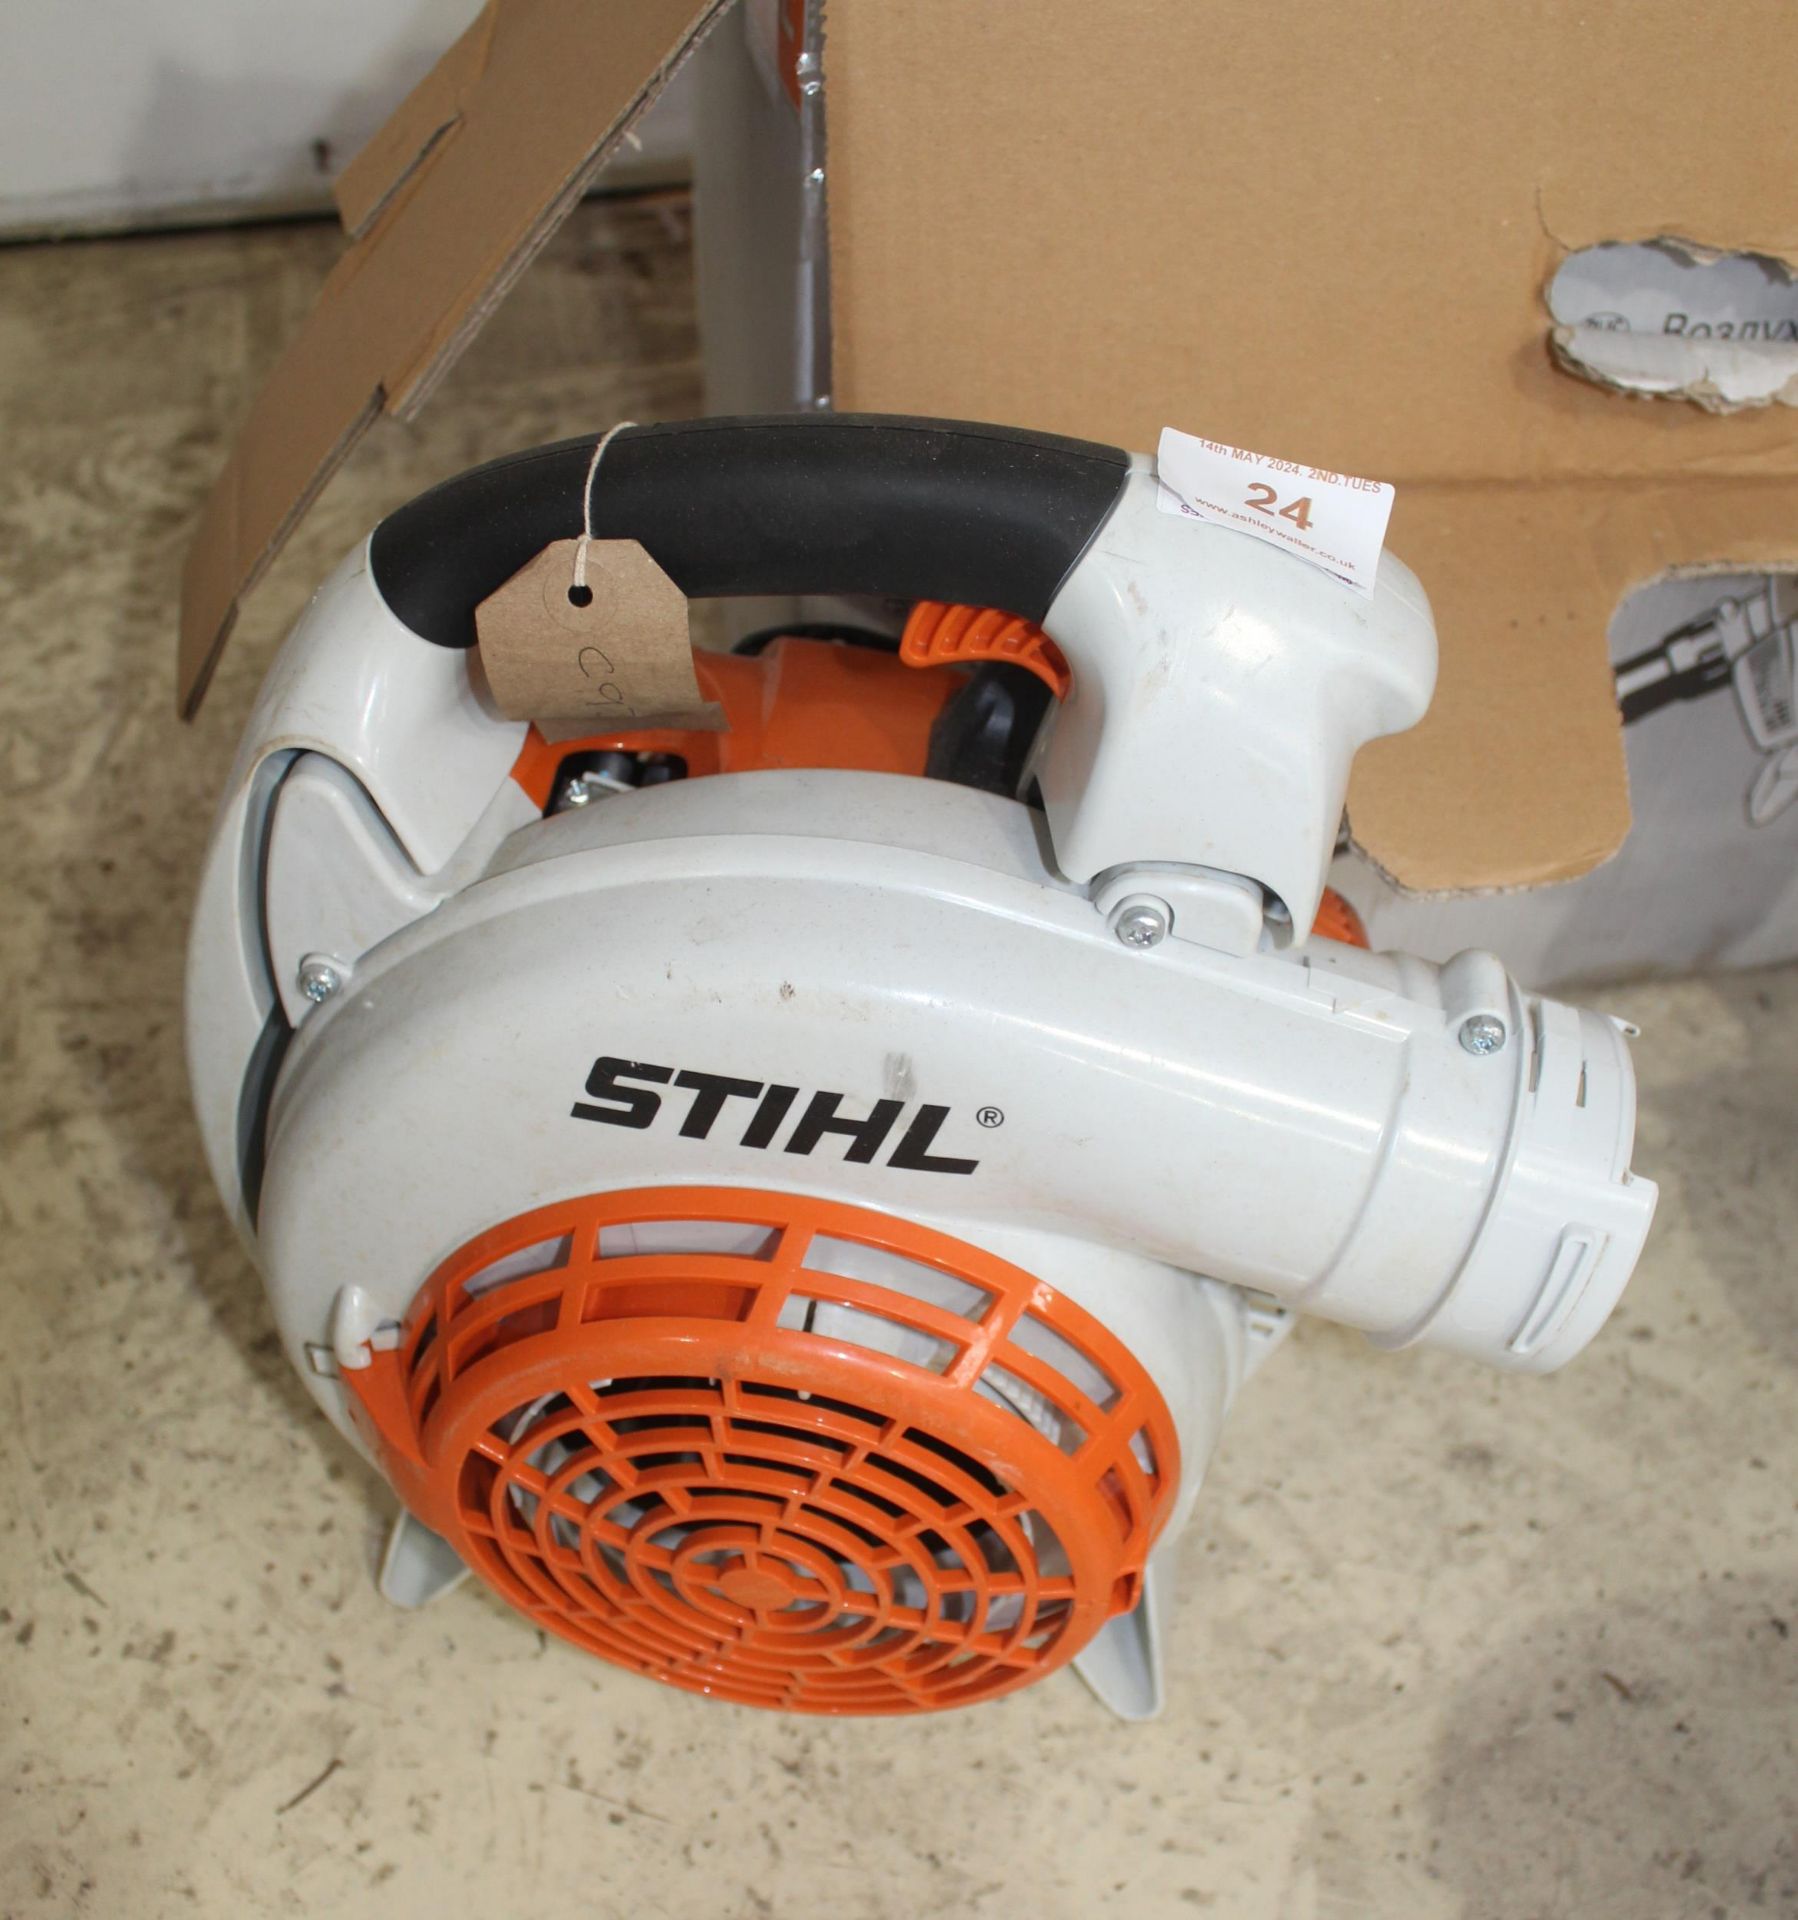 STIHL BG86C LEAF BLOWER AS NEW IN GOOD WORKING ORDER NO VAT - Image 2 of 3